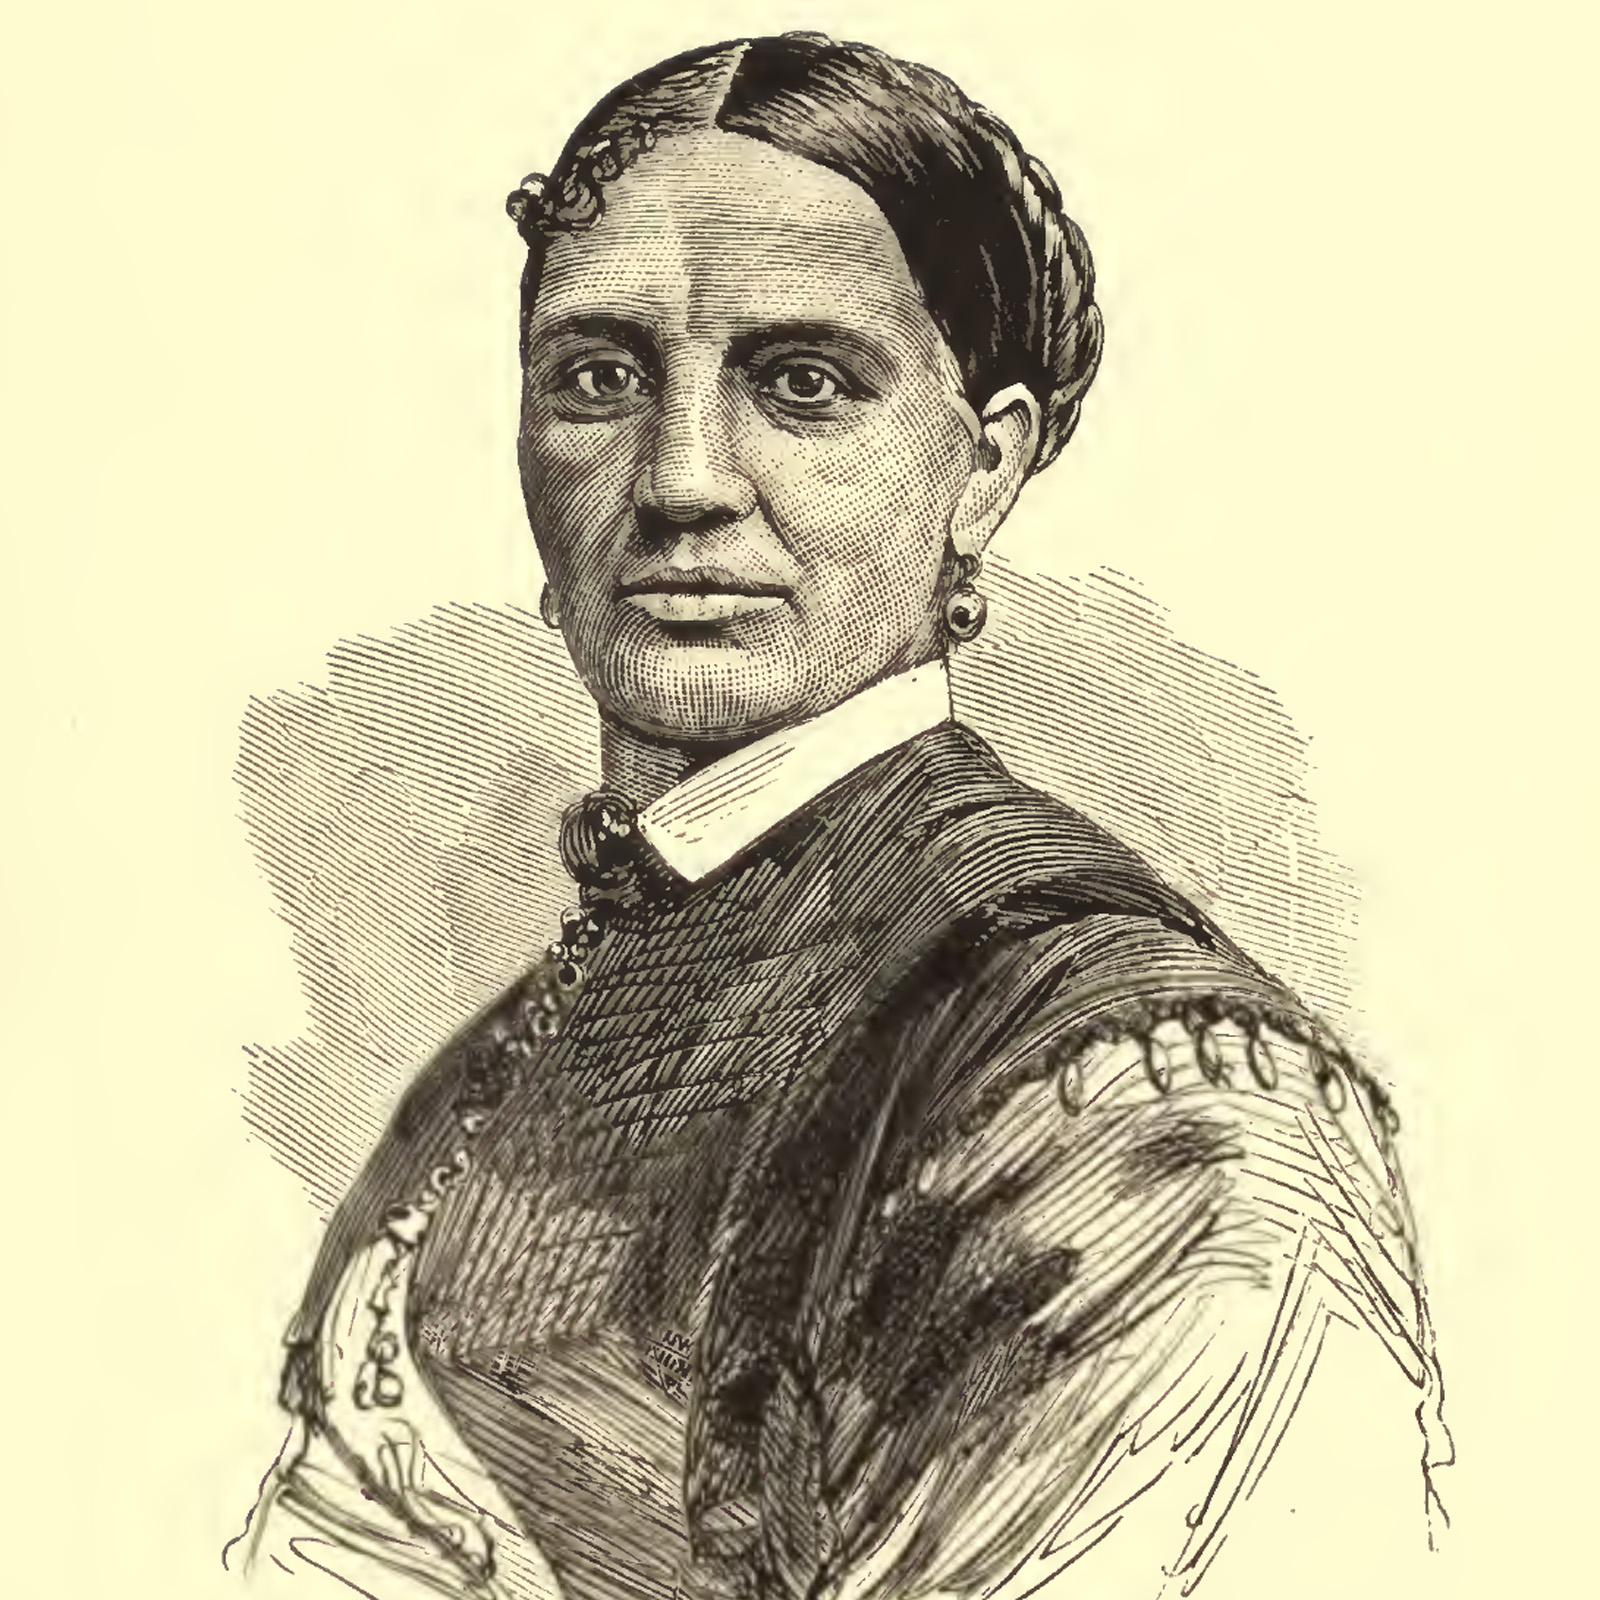  Printed portrait of Elizabeth Keckly included in her autobiography "Behind the Scenes"